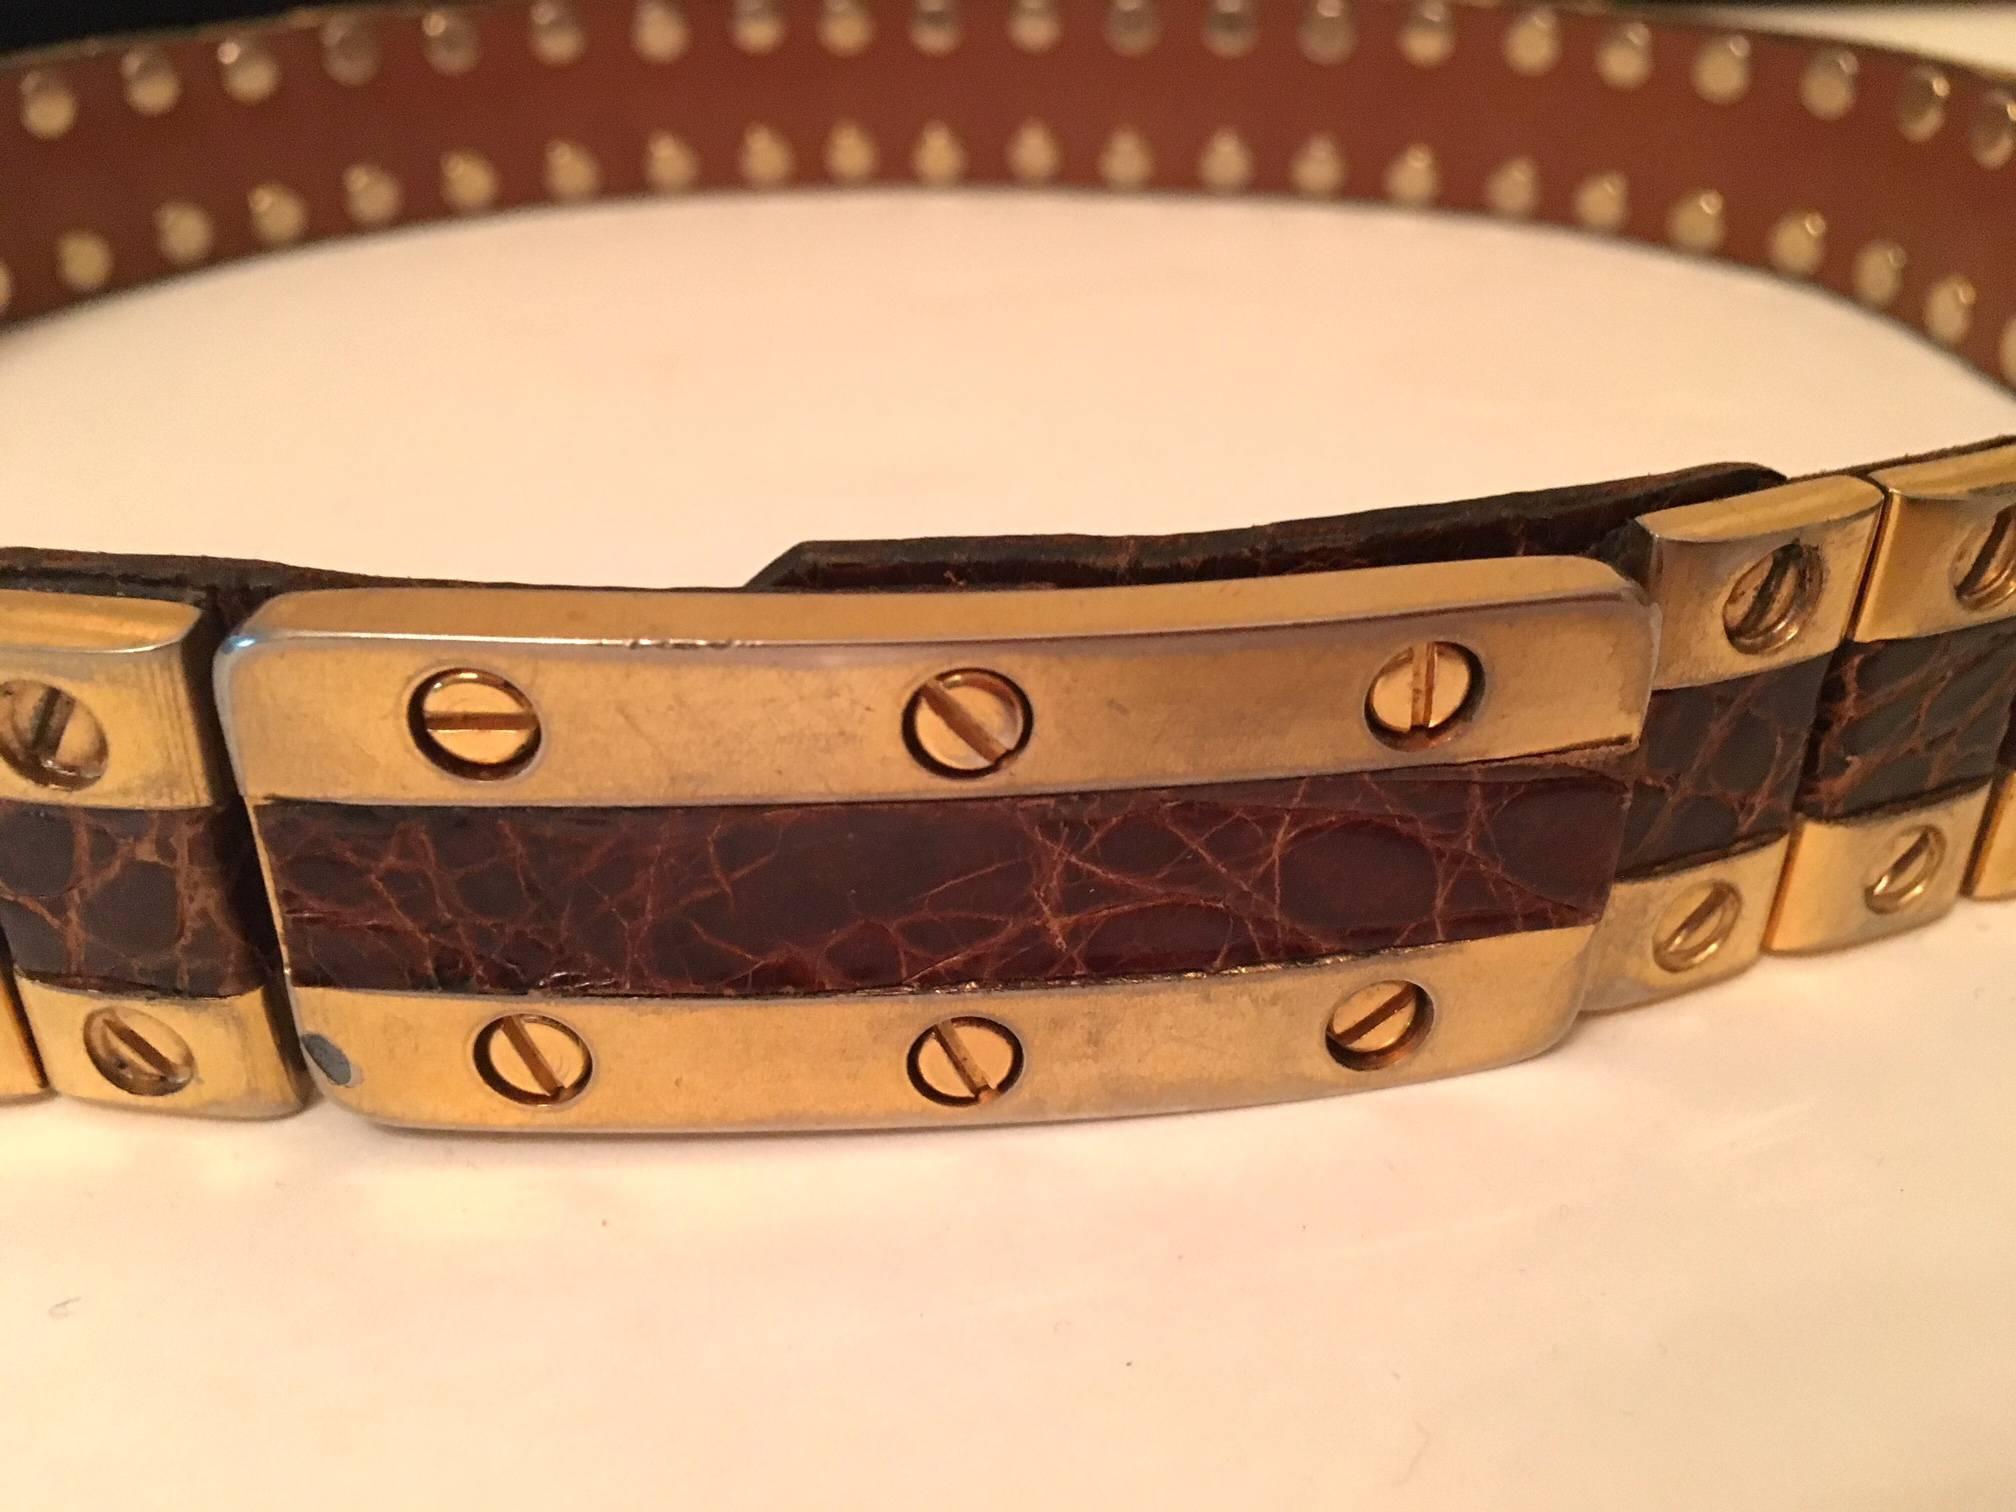 Important vintage leather and gold plated metal  Belt .Manner of Gucci.
High Quality hand work.
please ask for more details and the leather
The belt is adjustable.
maximum total lenght 75 cm = 29 and 1/2 inches. 
circa 1970